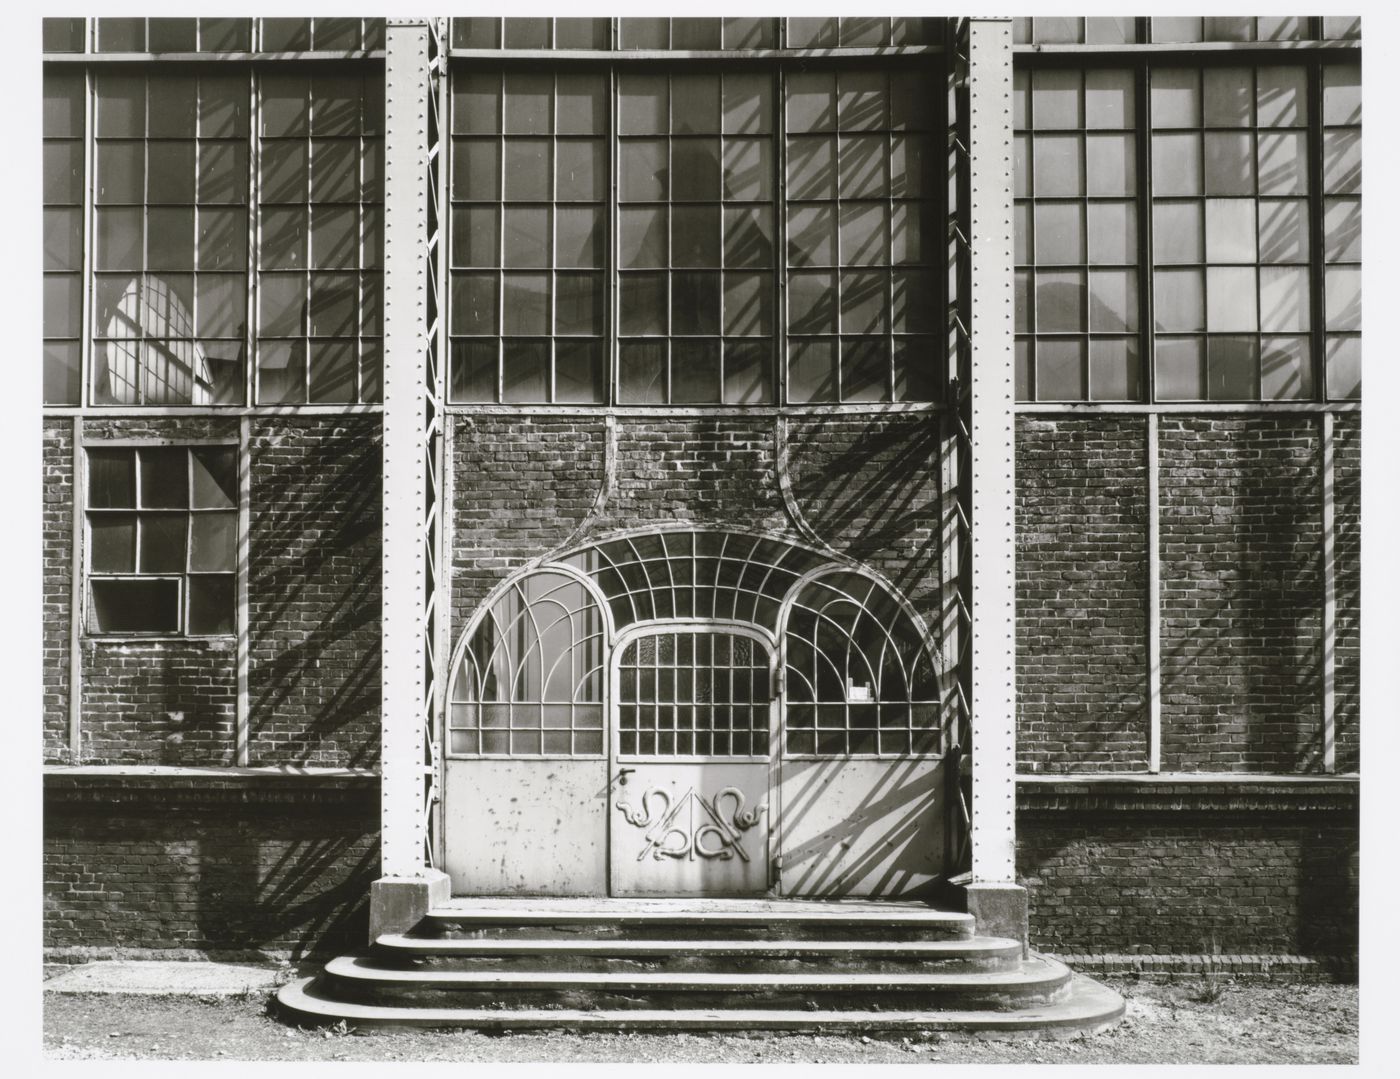 View of an entrance to the turbine building of Zeche Zollern 2 [Colliery Zollern 2] (now the Westphalian Industrial Museum) showing decorative ironwork, Bövinghausen, Dortmund, Germany